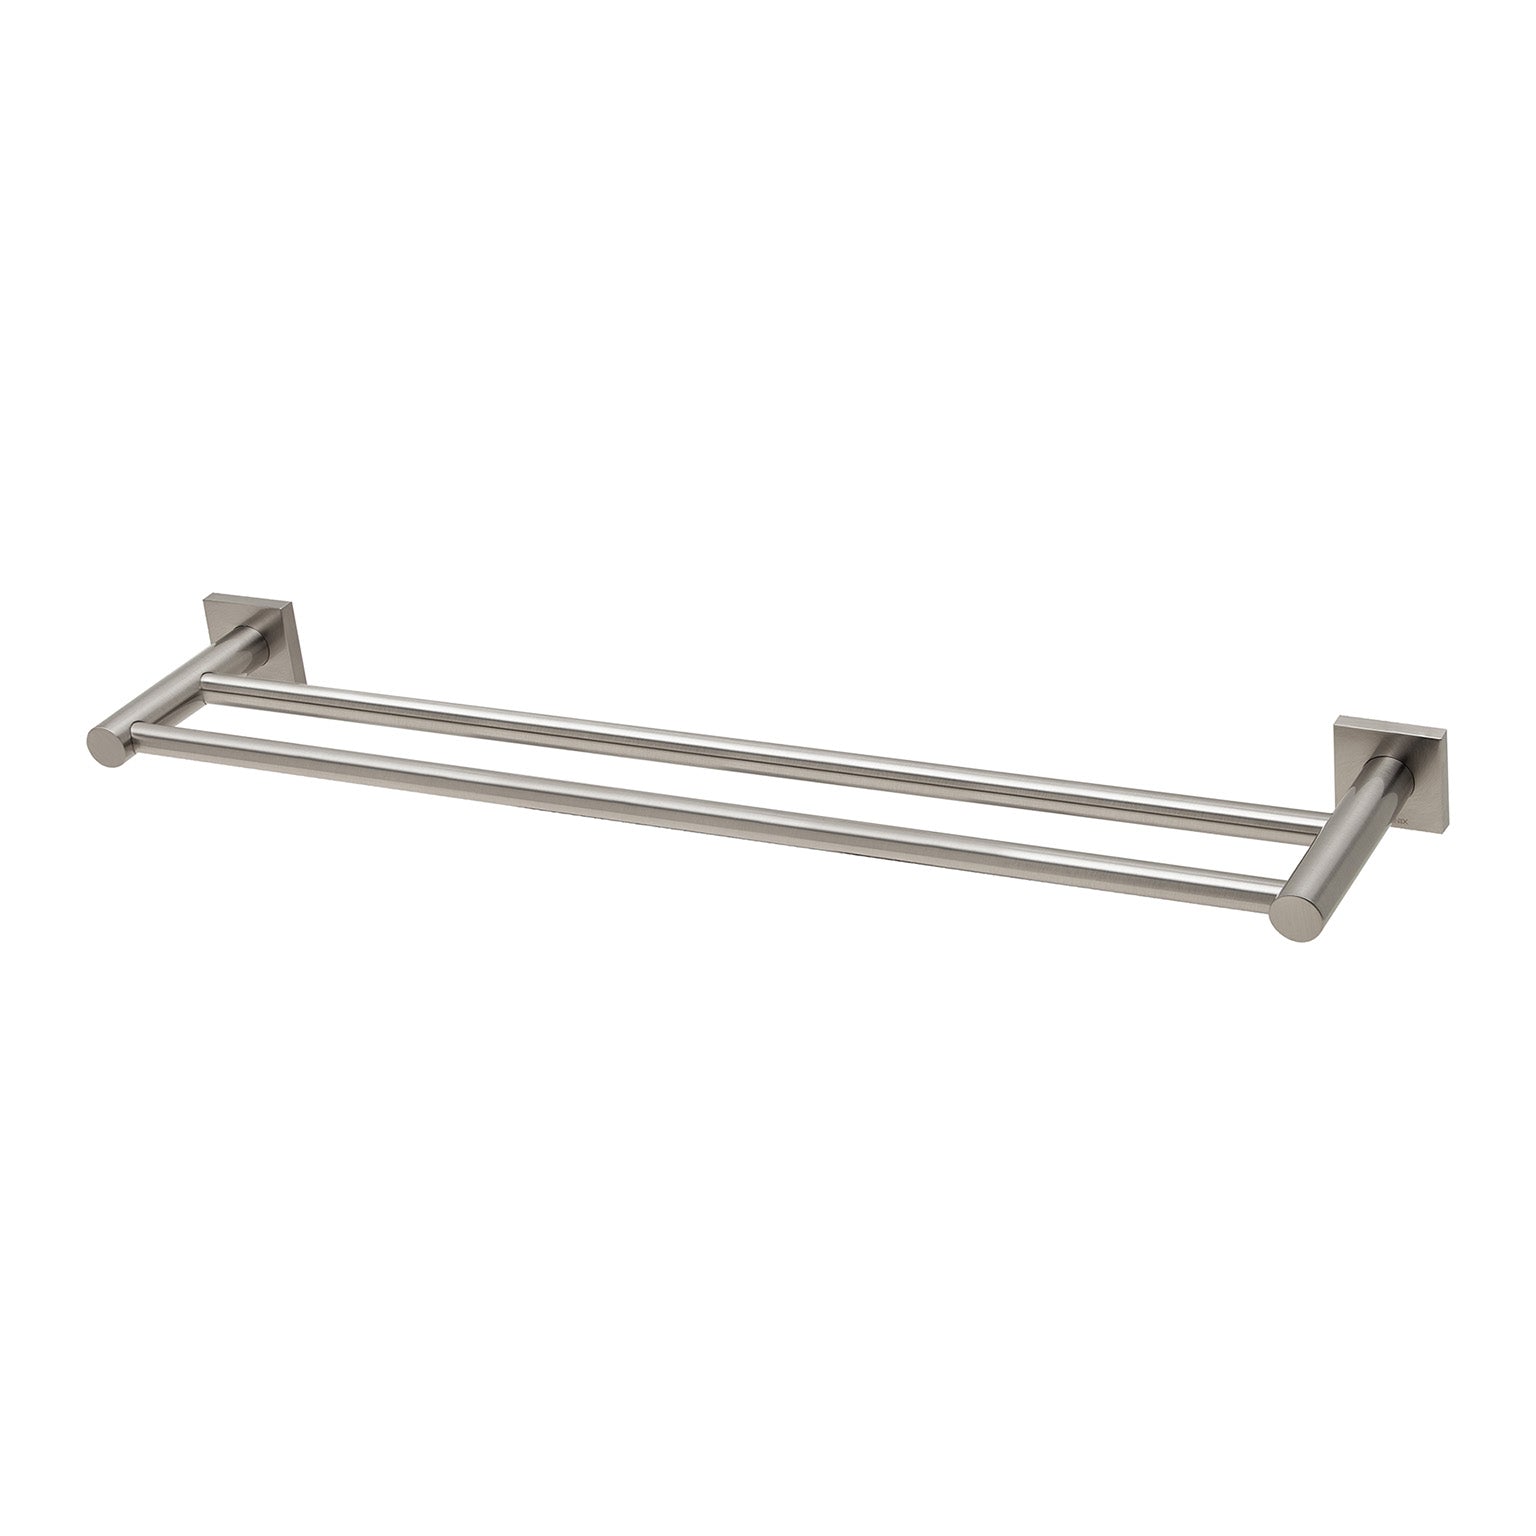 PHOENIX RADII DOUBLE NON-HEATED TOWEL RAIL SQUARE PLATE BRUSHED NICKEL 600MM AND 800MM